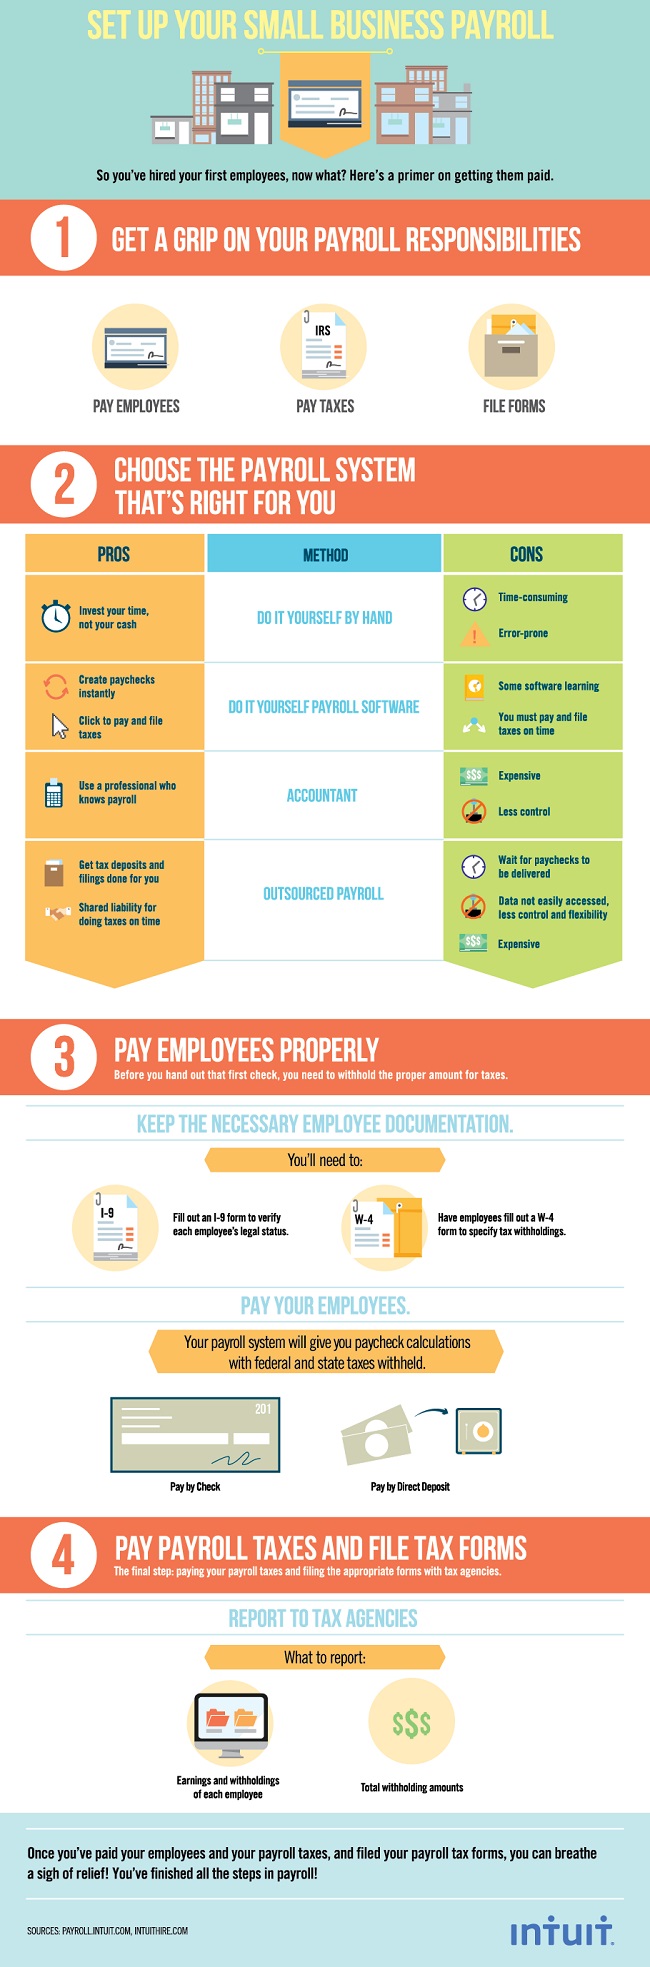 4-steps-to-a-successful-small-business-payroll-process.jpg